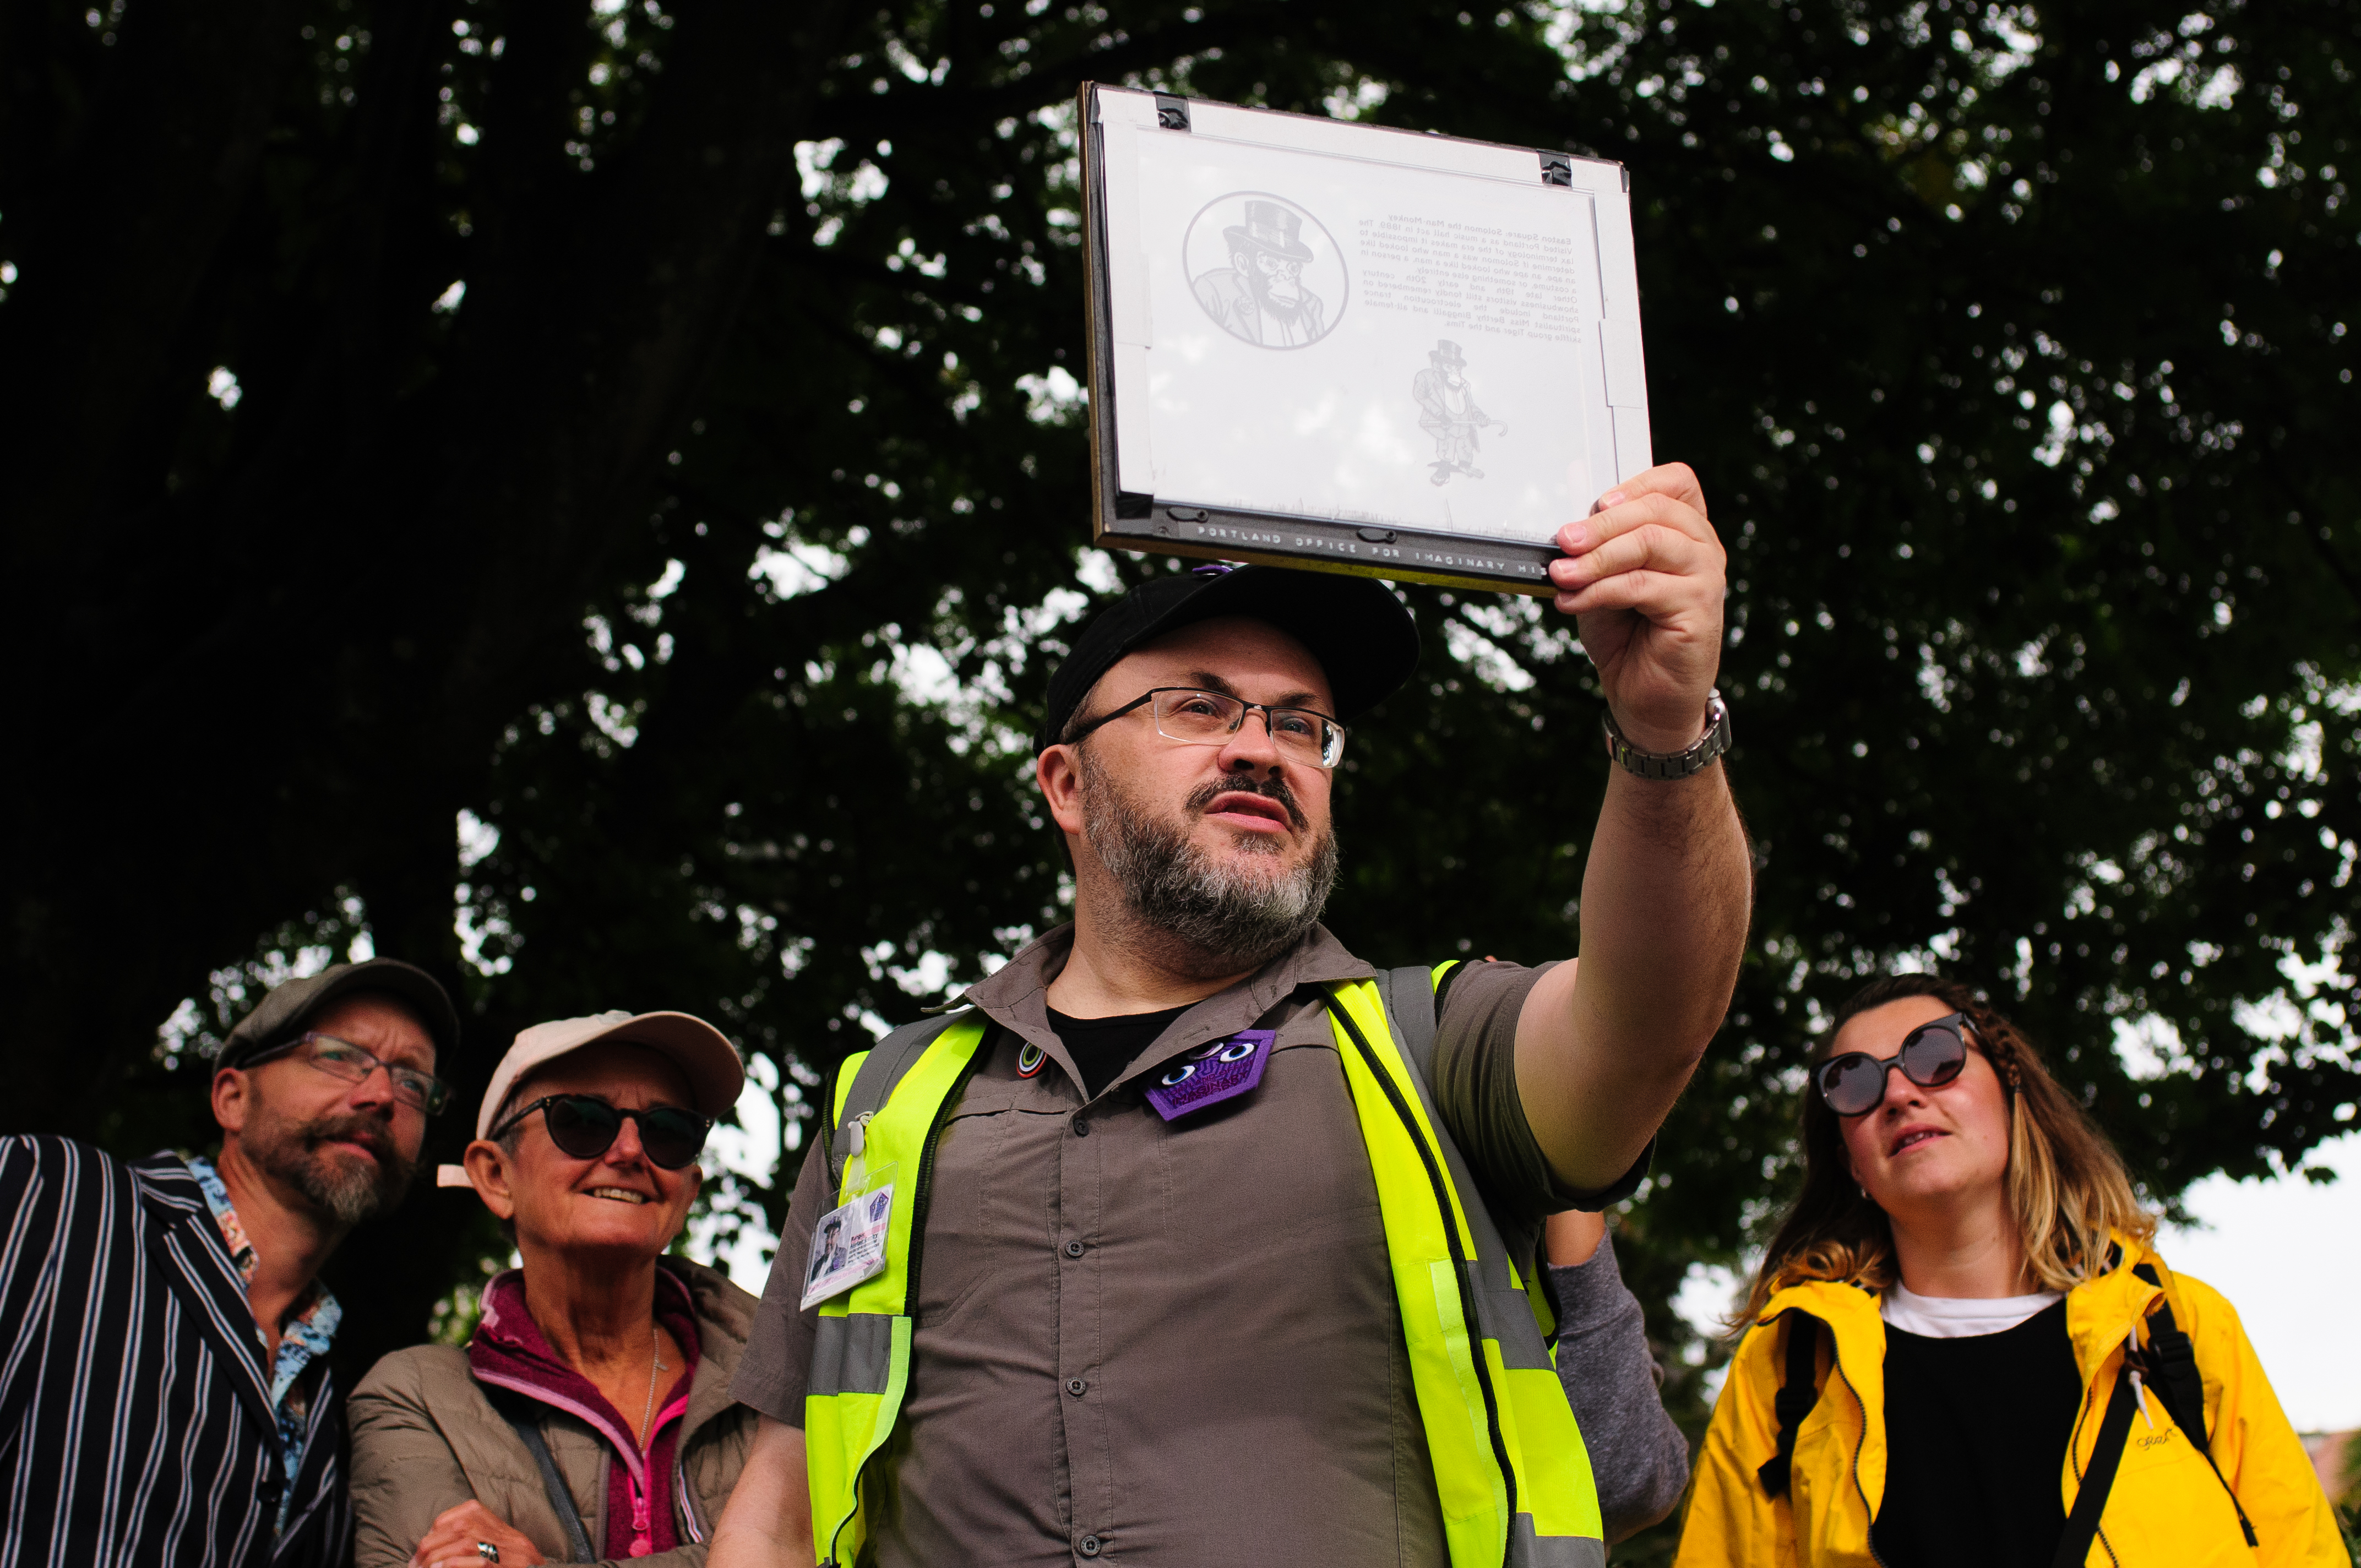 Alistair Gentry in uniform as an imaginary history ranger (khaki shirt, cap and yellow hi vis jacket), leading a tour and showing an image through a transparency viewer.